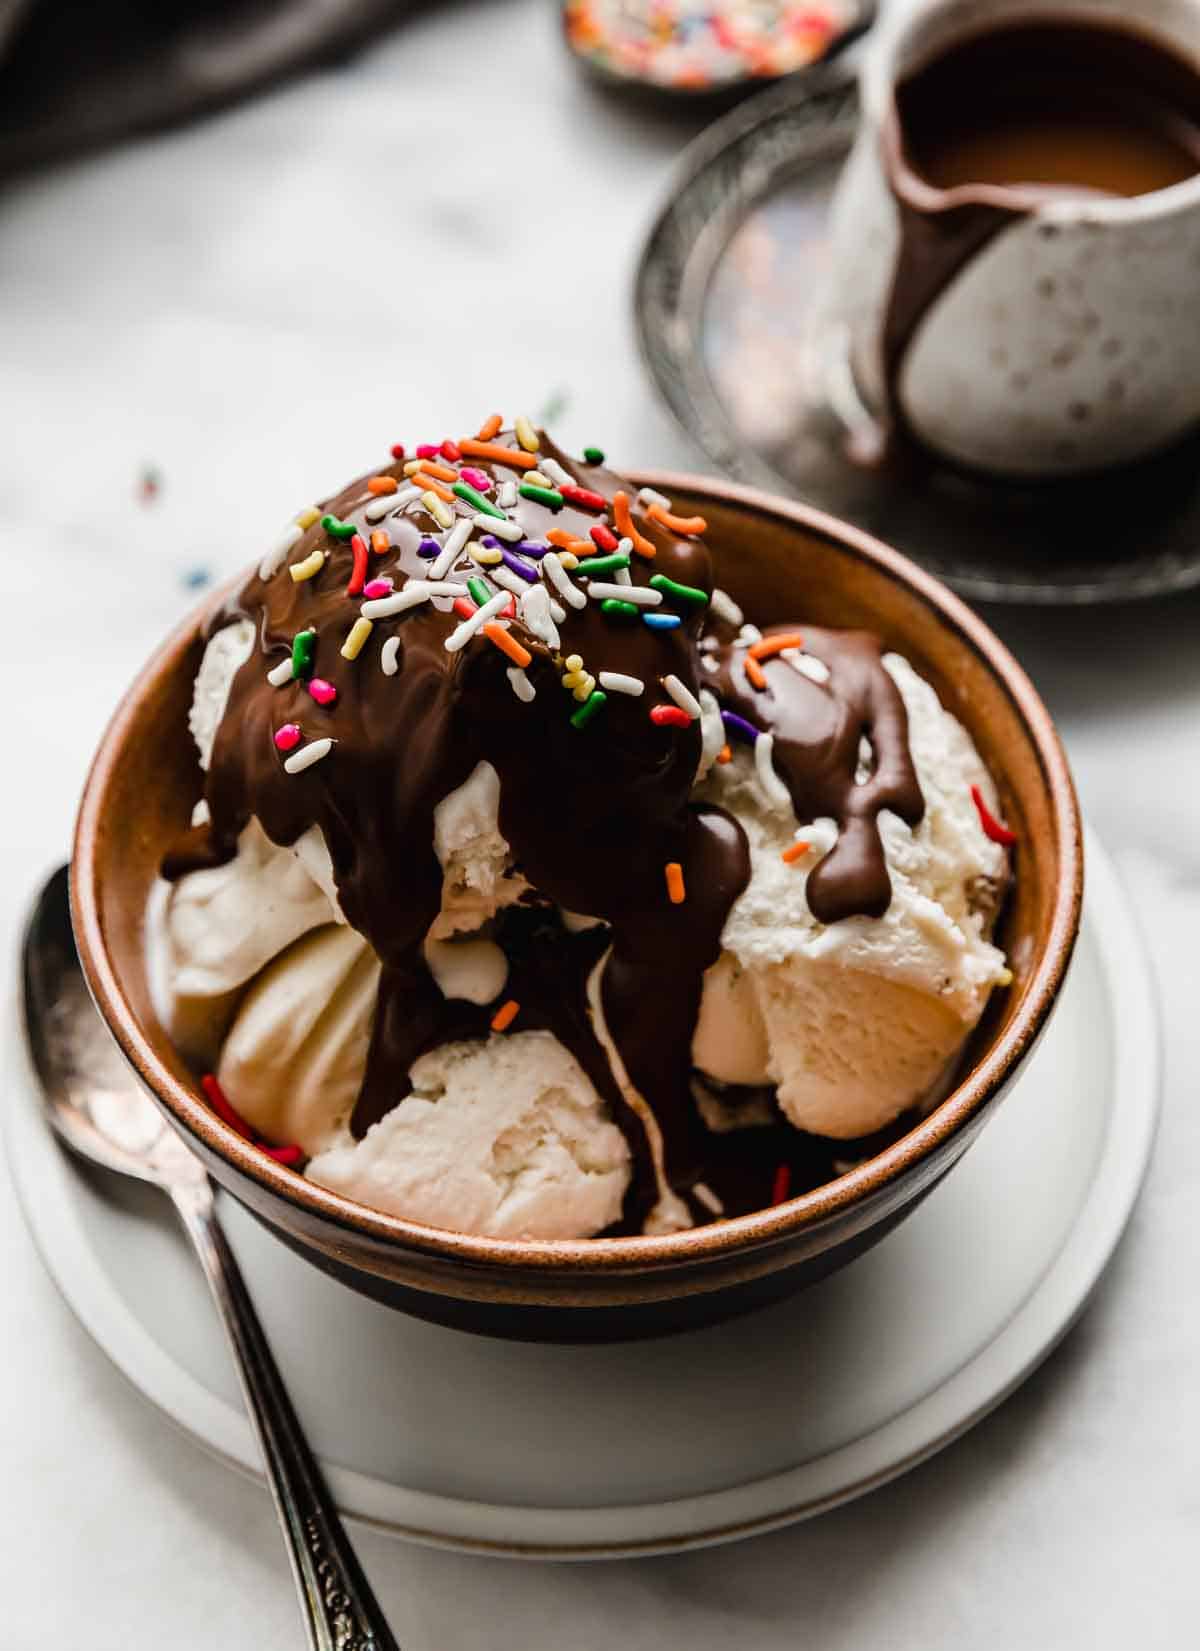 Vanilla ice cream in a brown bowl topped with homemade magic shell recipe and colorful sprinkles.